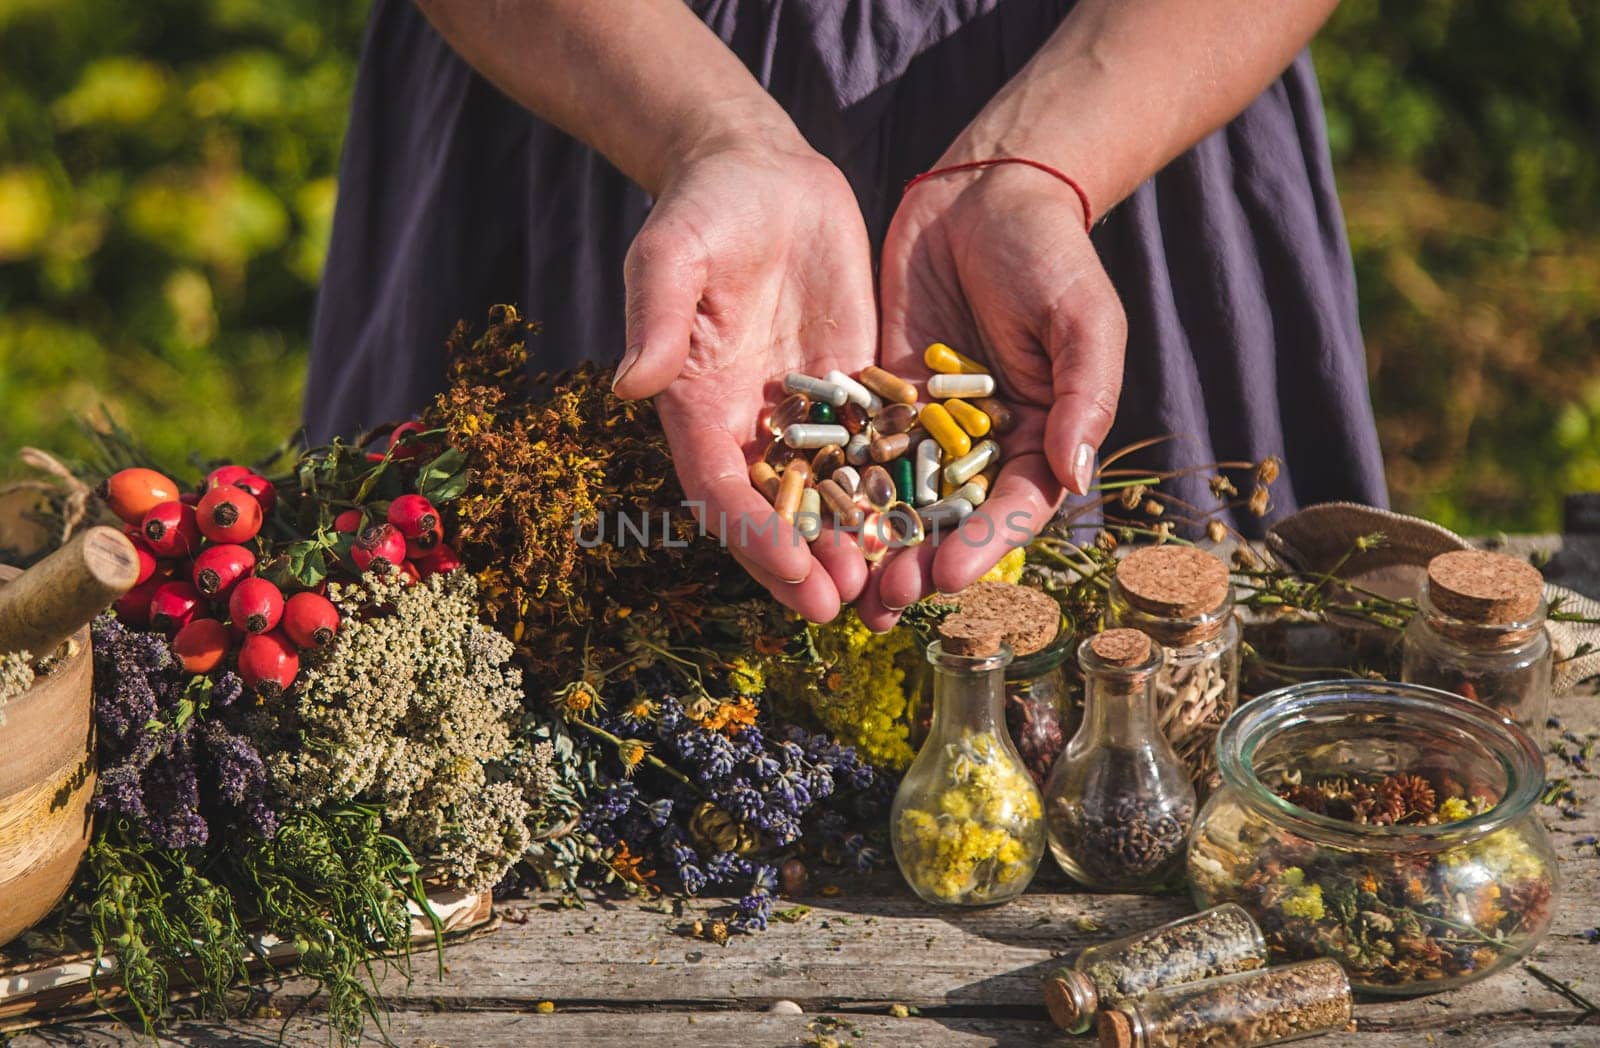 In the hands of herbs and supplements. Selective focus. Nature.